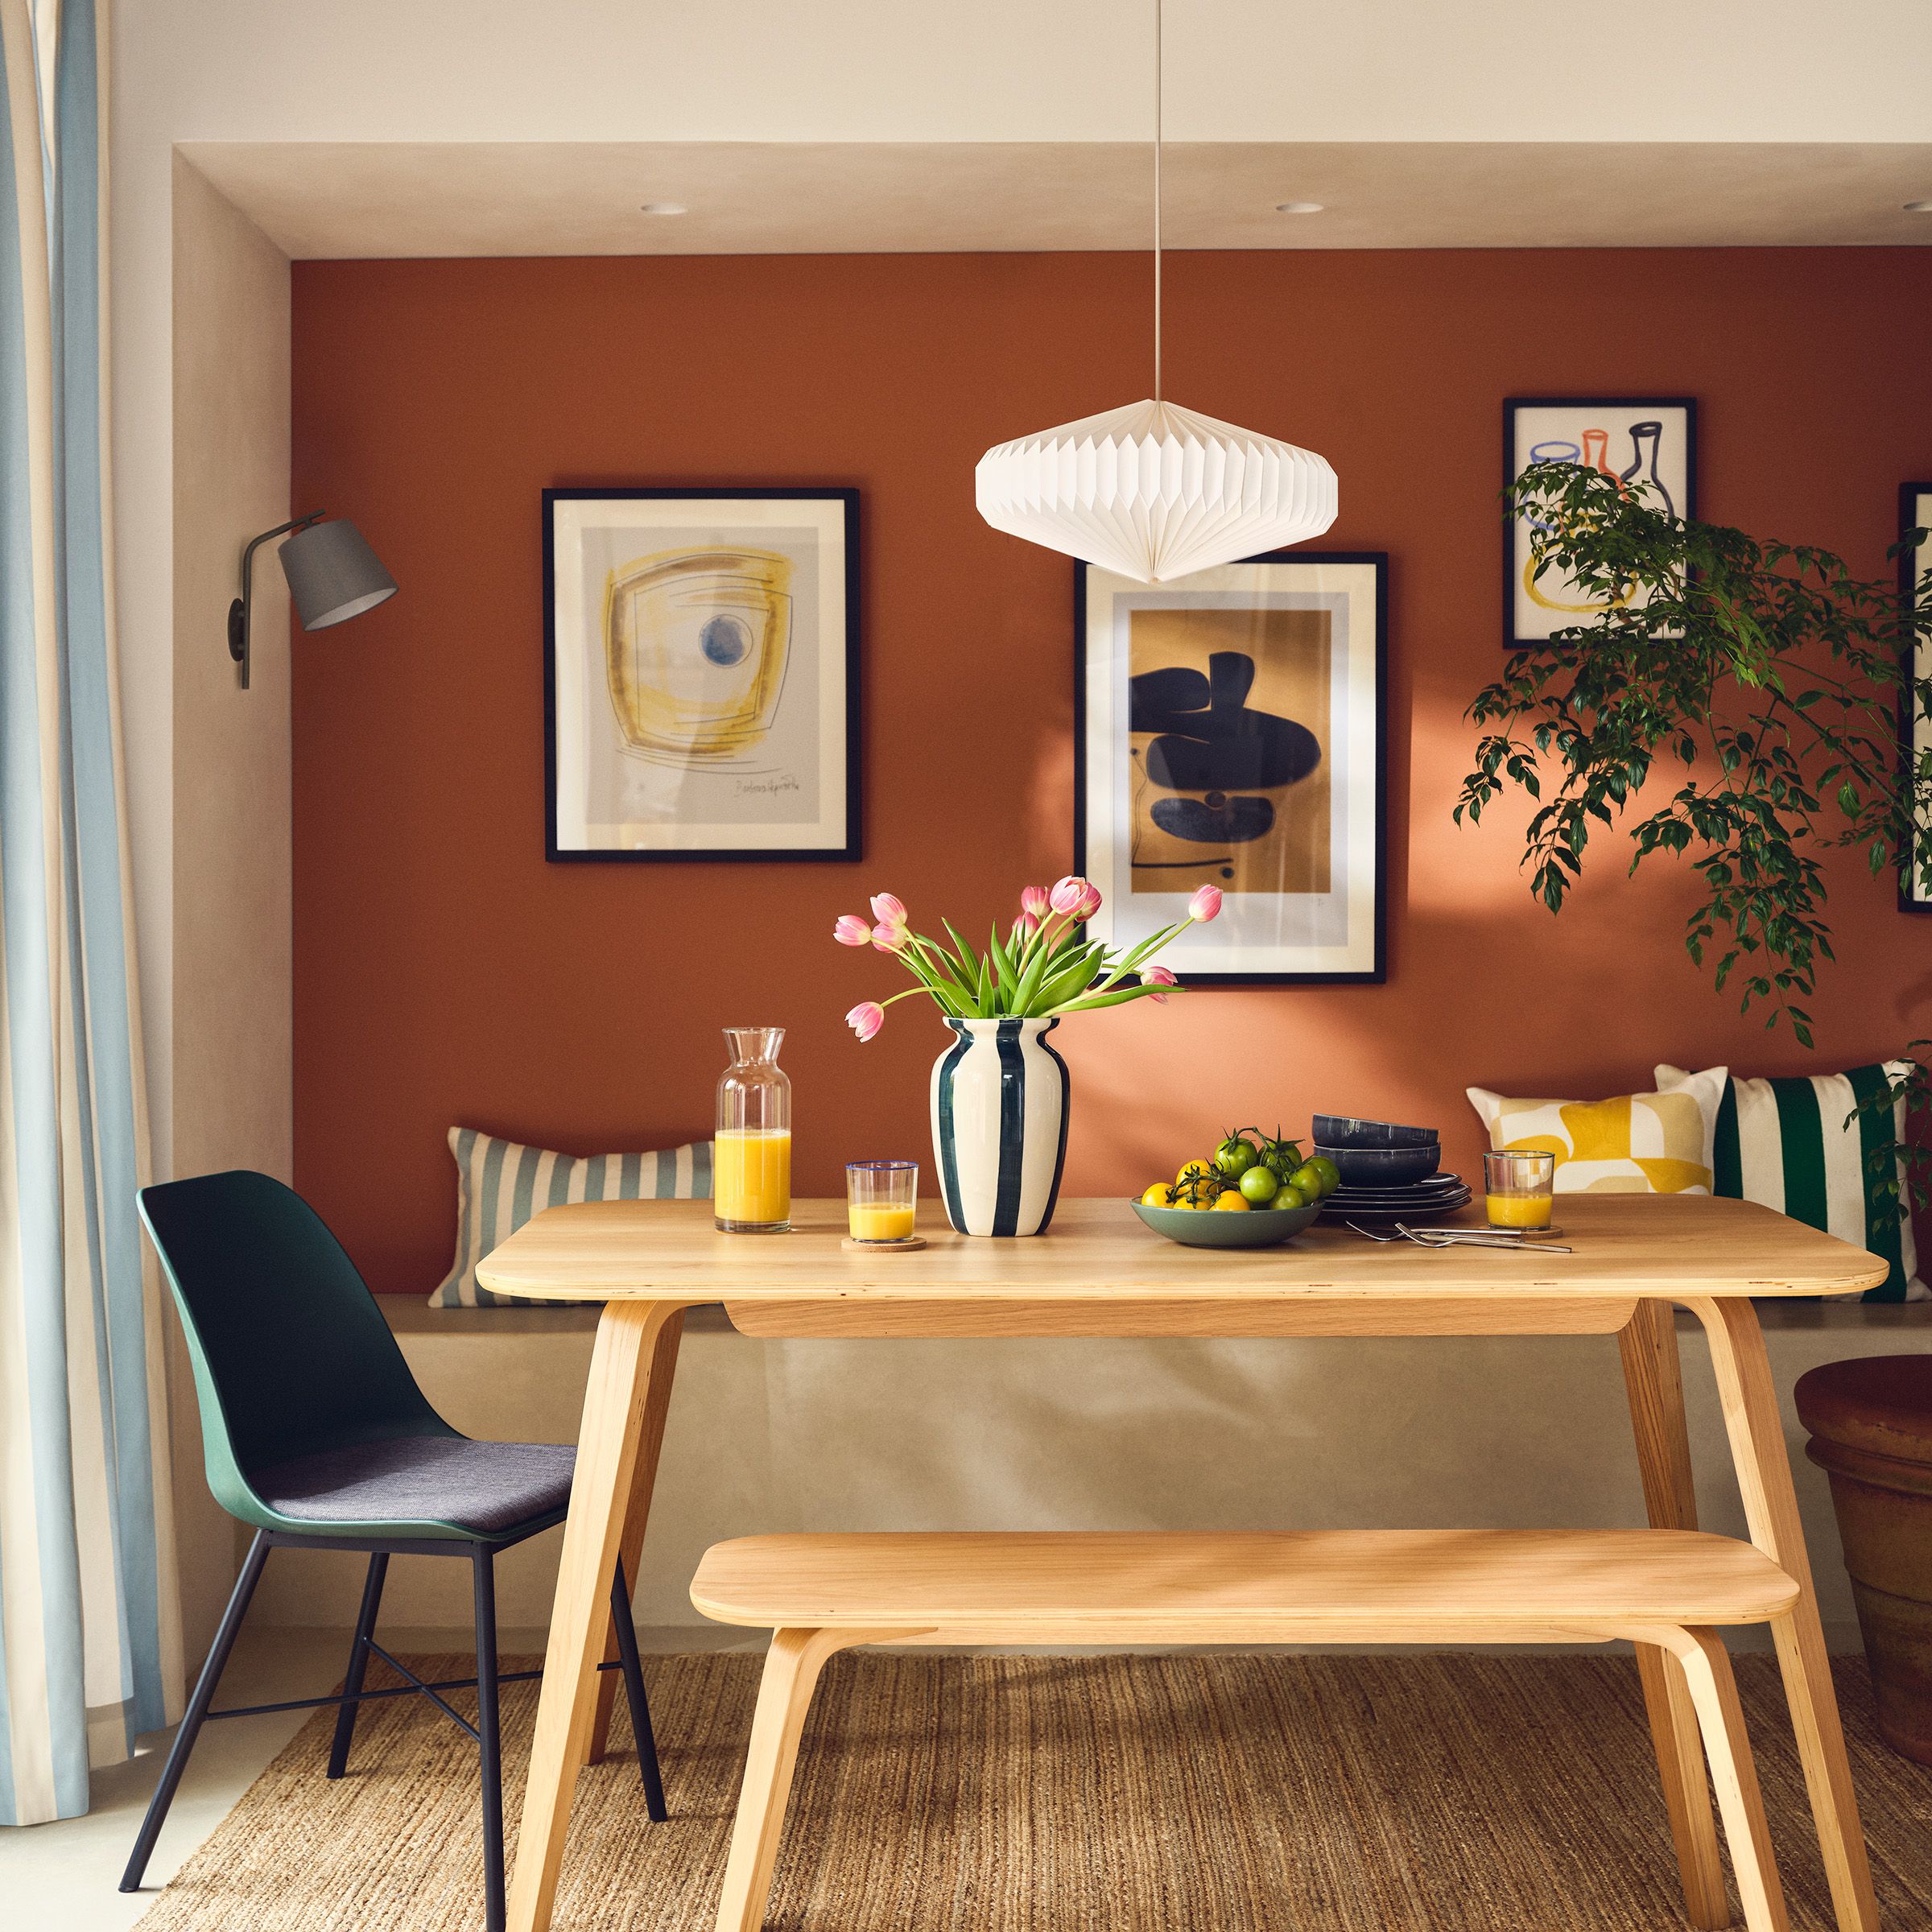 Framed artwork above a dining table against an orange wall